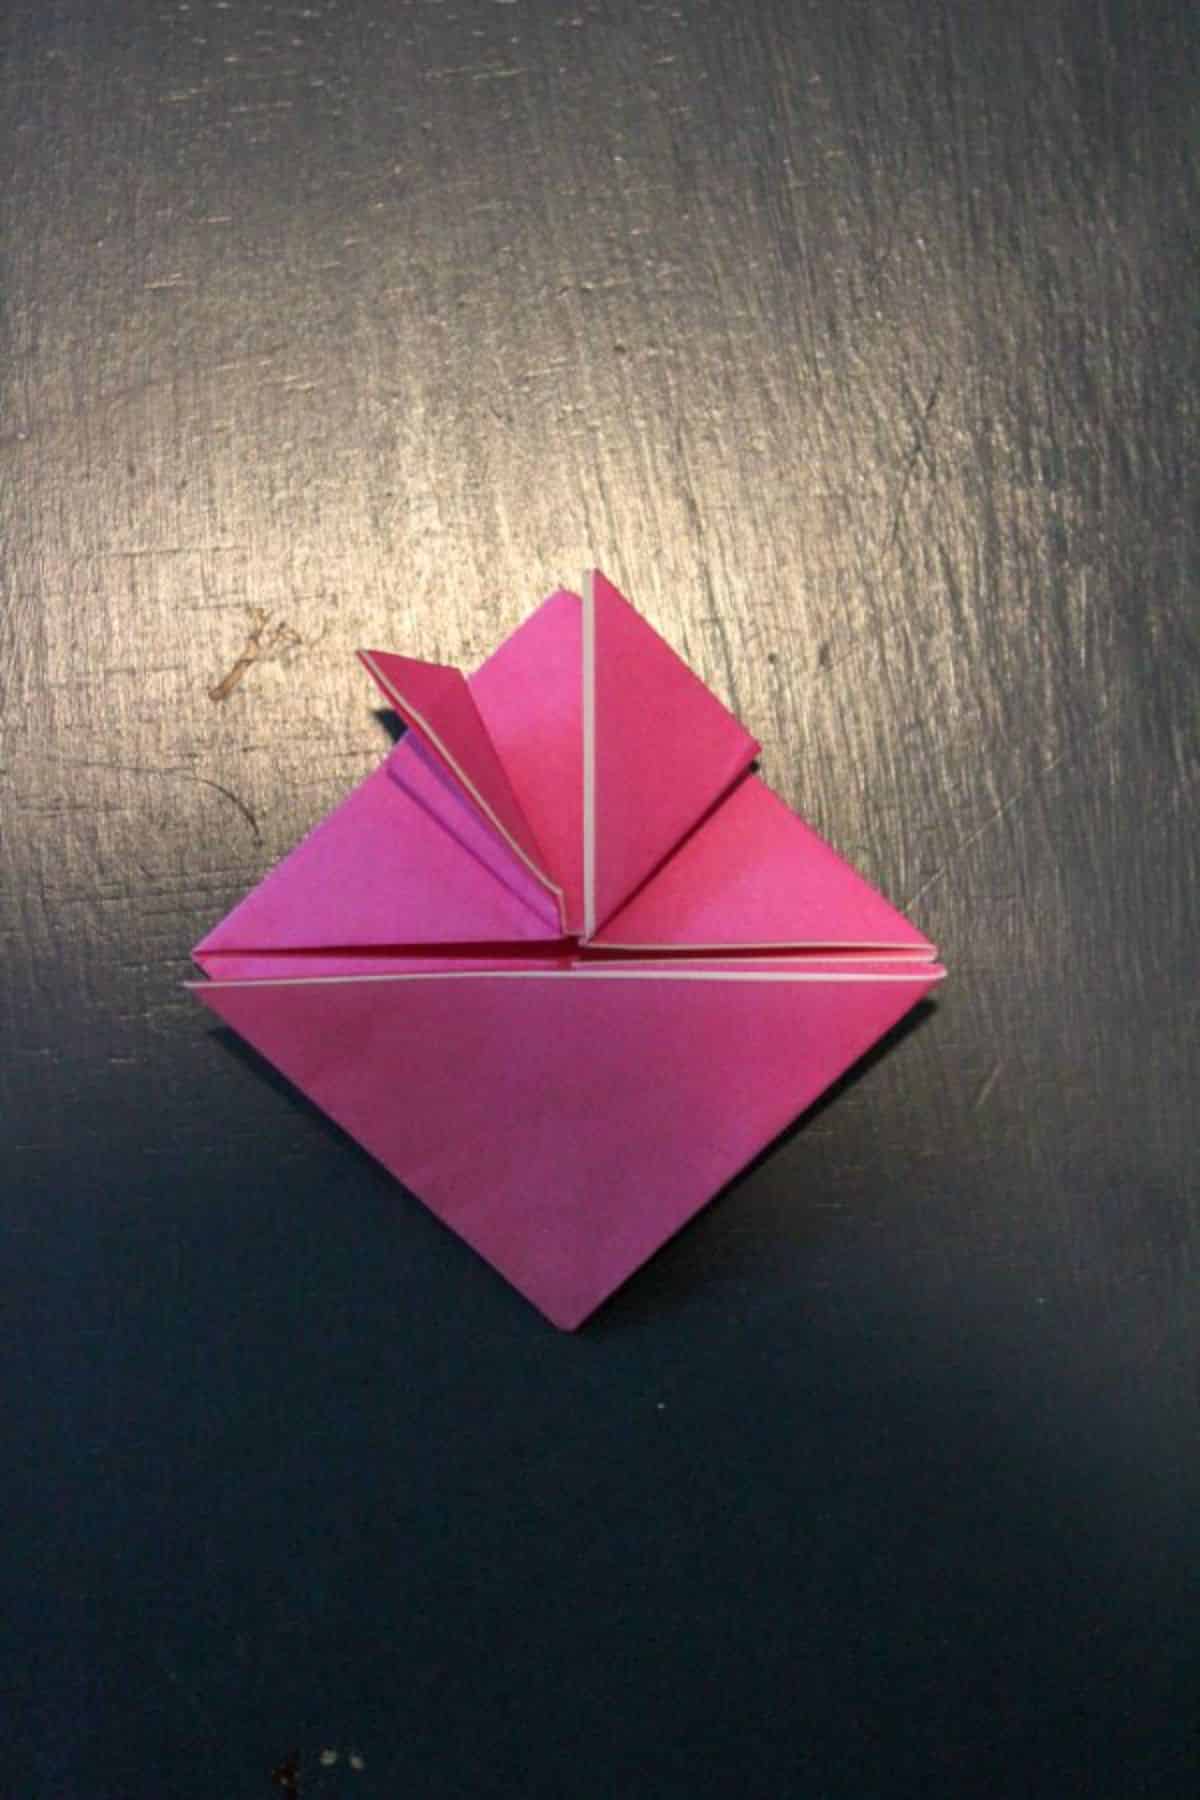 origami paper is now folded with the top part of the left side folded upwards, back down.